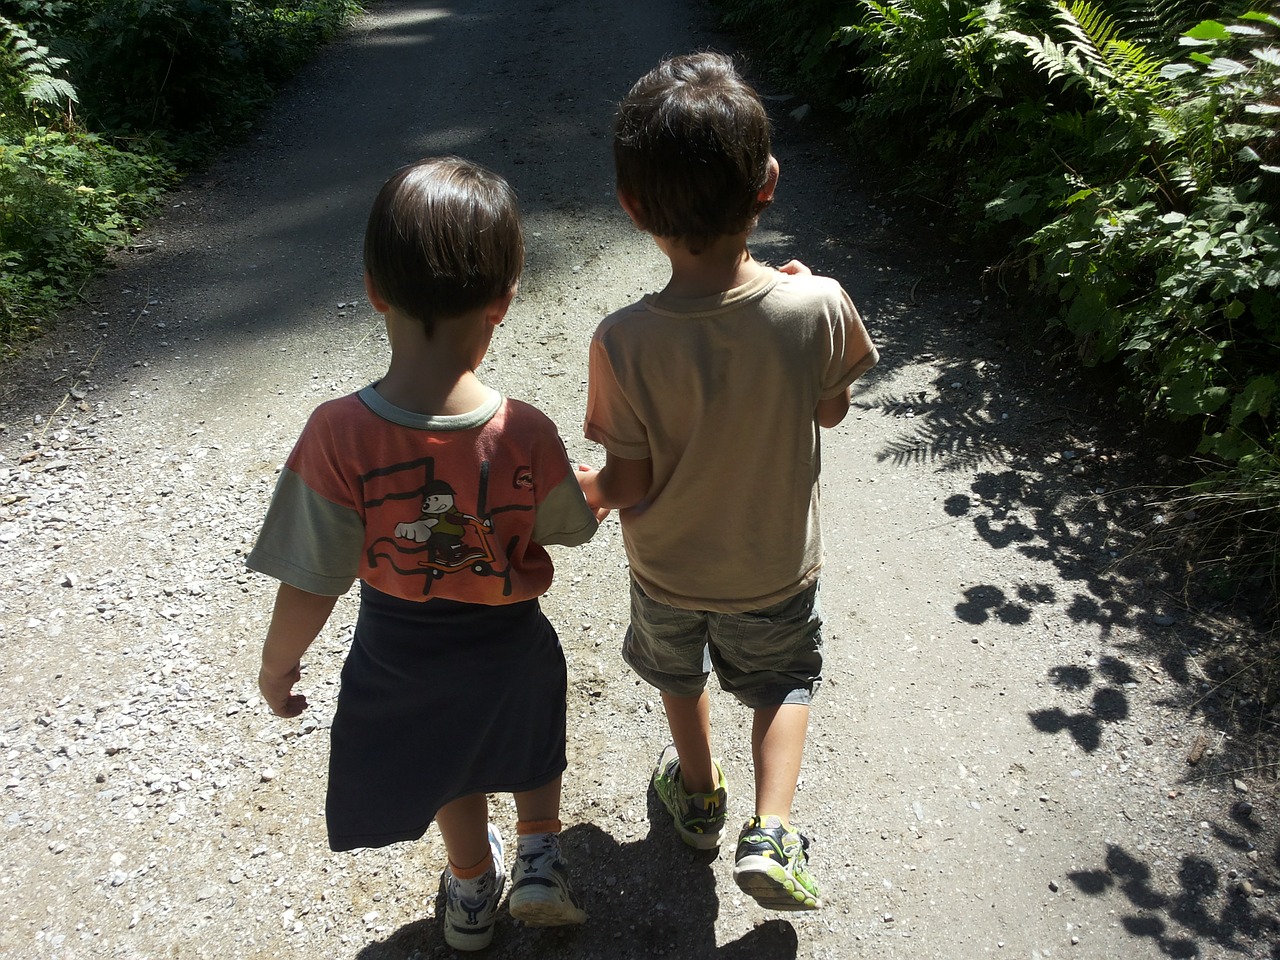 Two children walking together